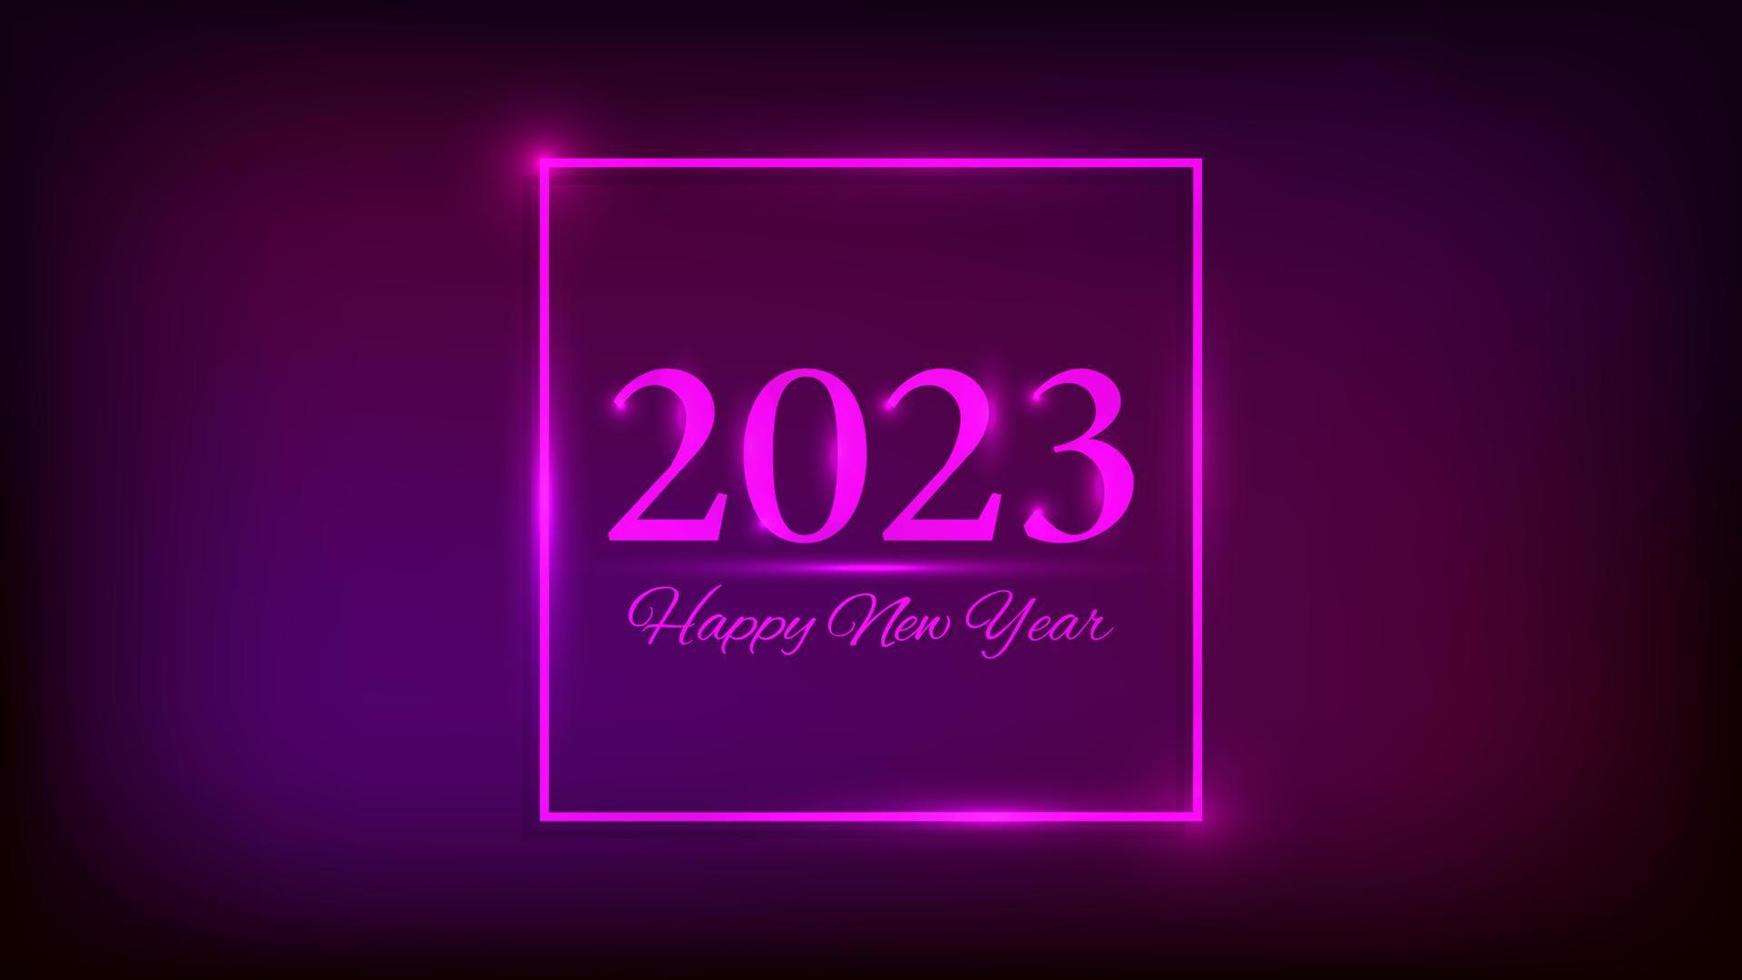 2023 Happy New Year neon background. Neon square frame with shining effects for Christmas holiday greeting card, flyers or posters. Vector illustration